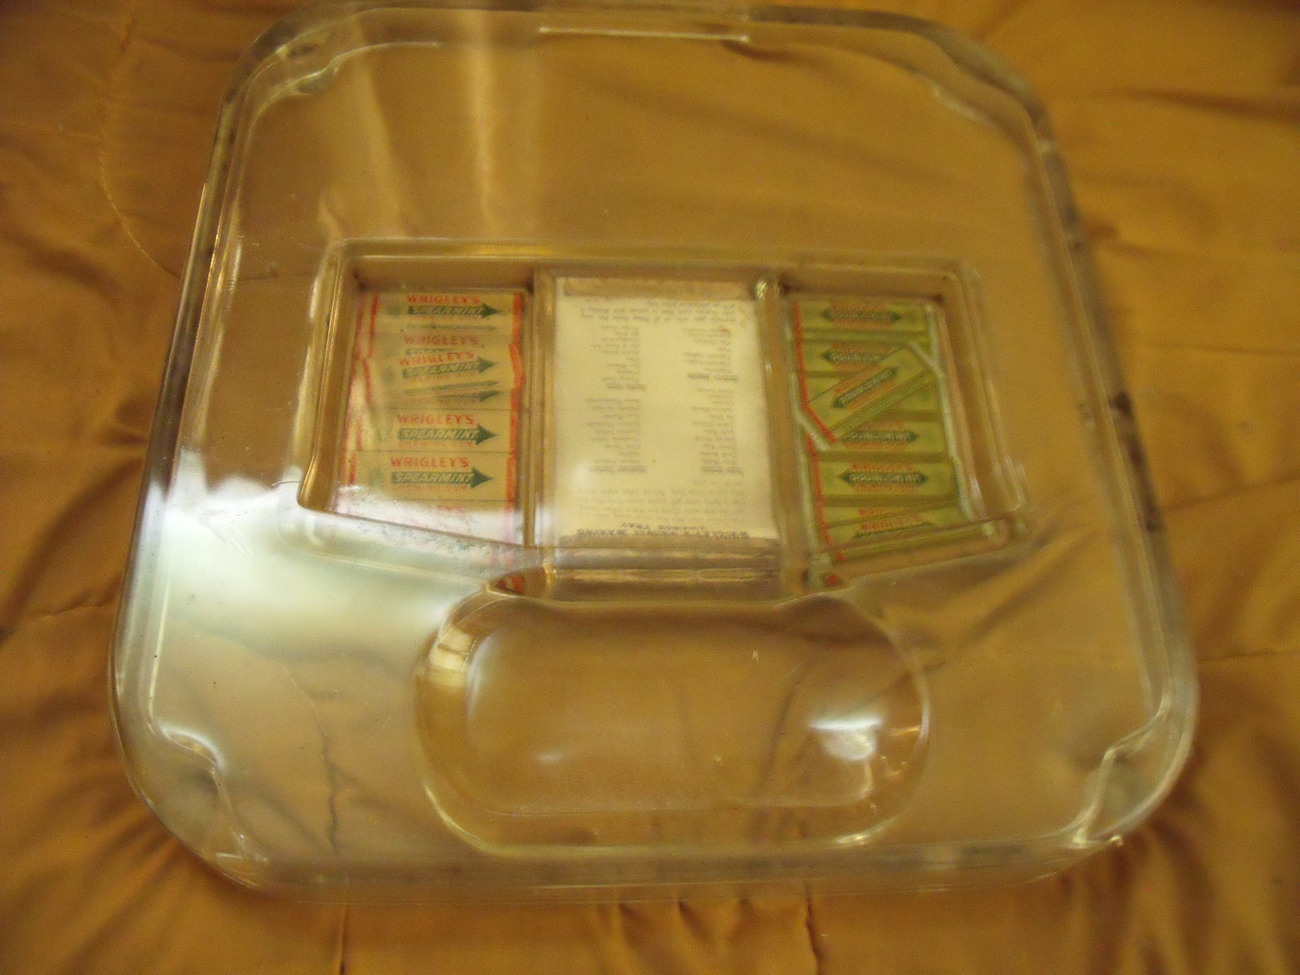 Primary image for Wrigley's Chewing Gum Country Store Display and Change Maker Glass Tray